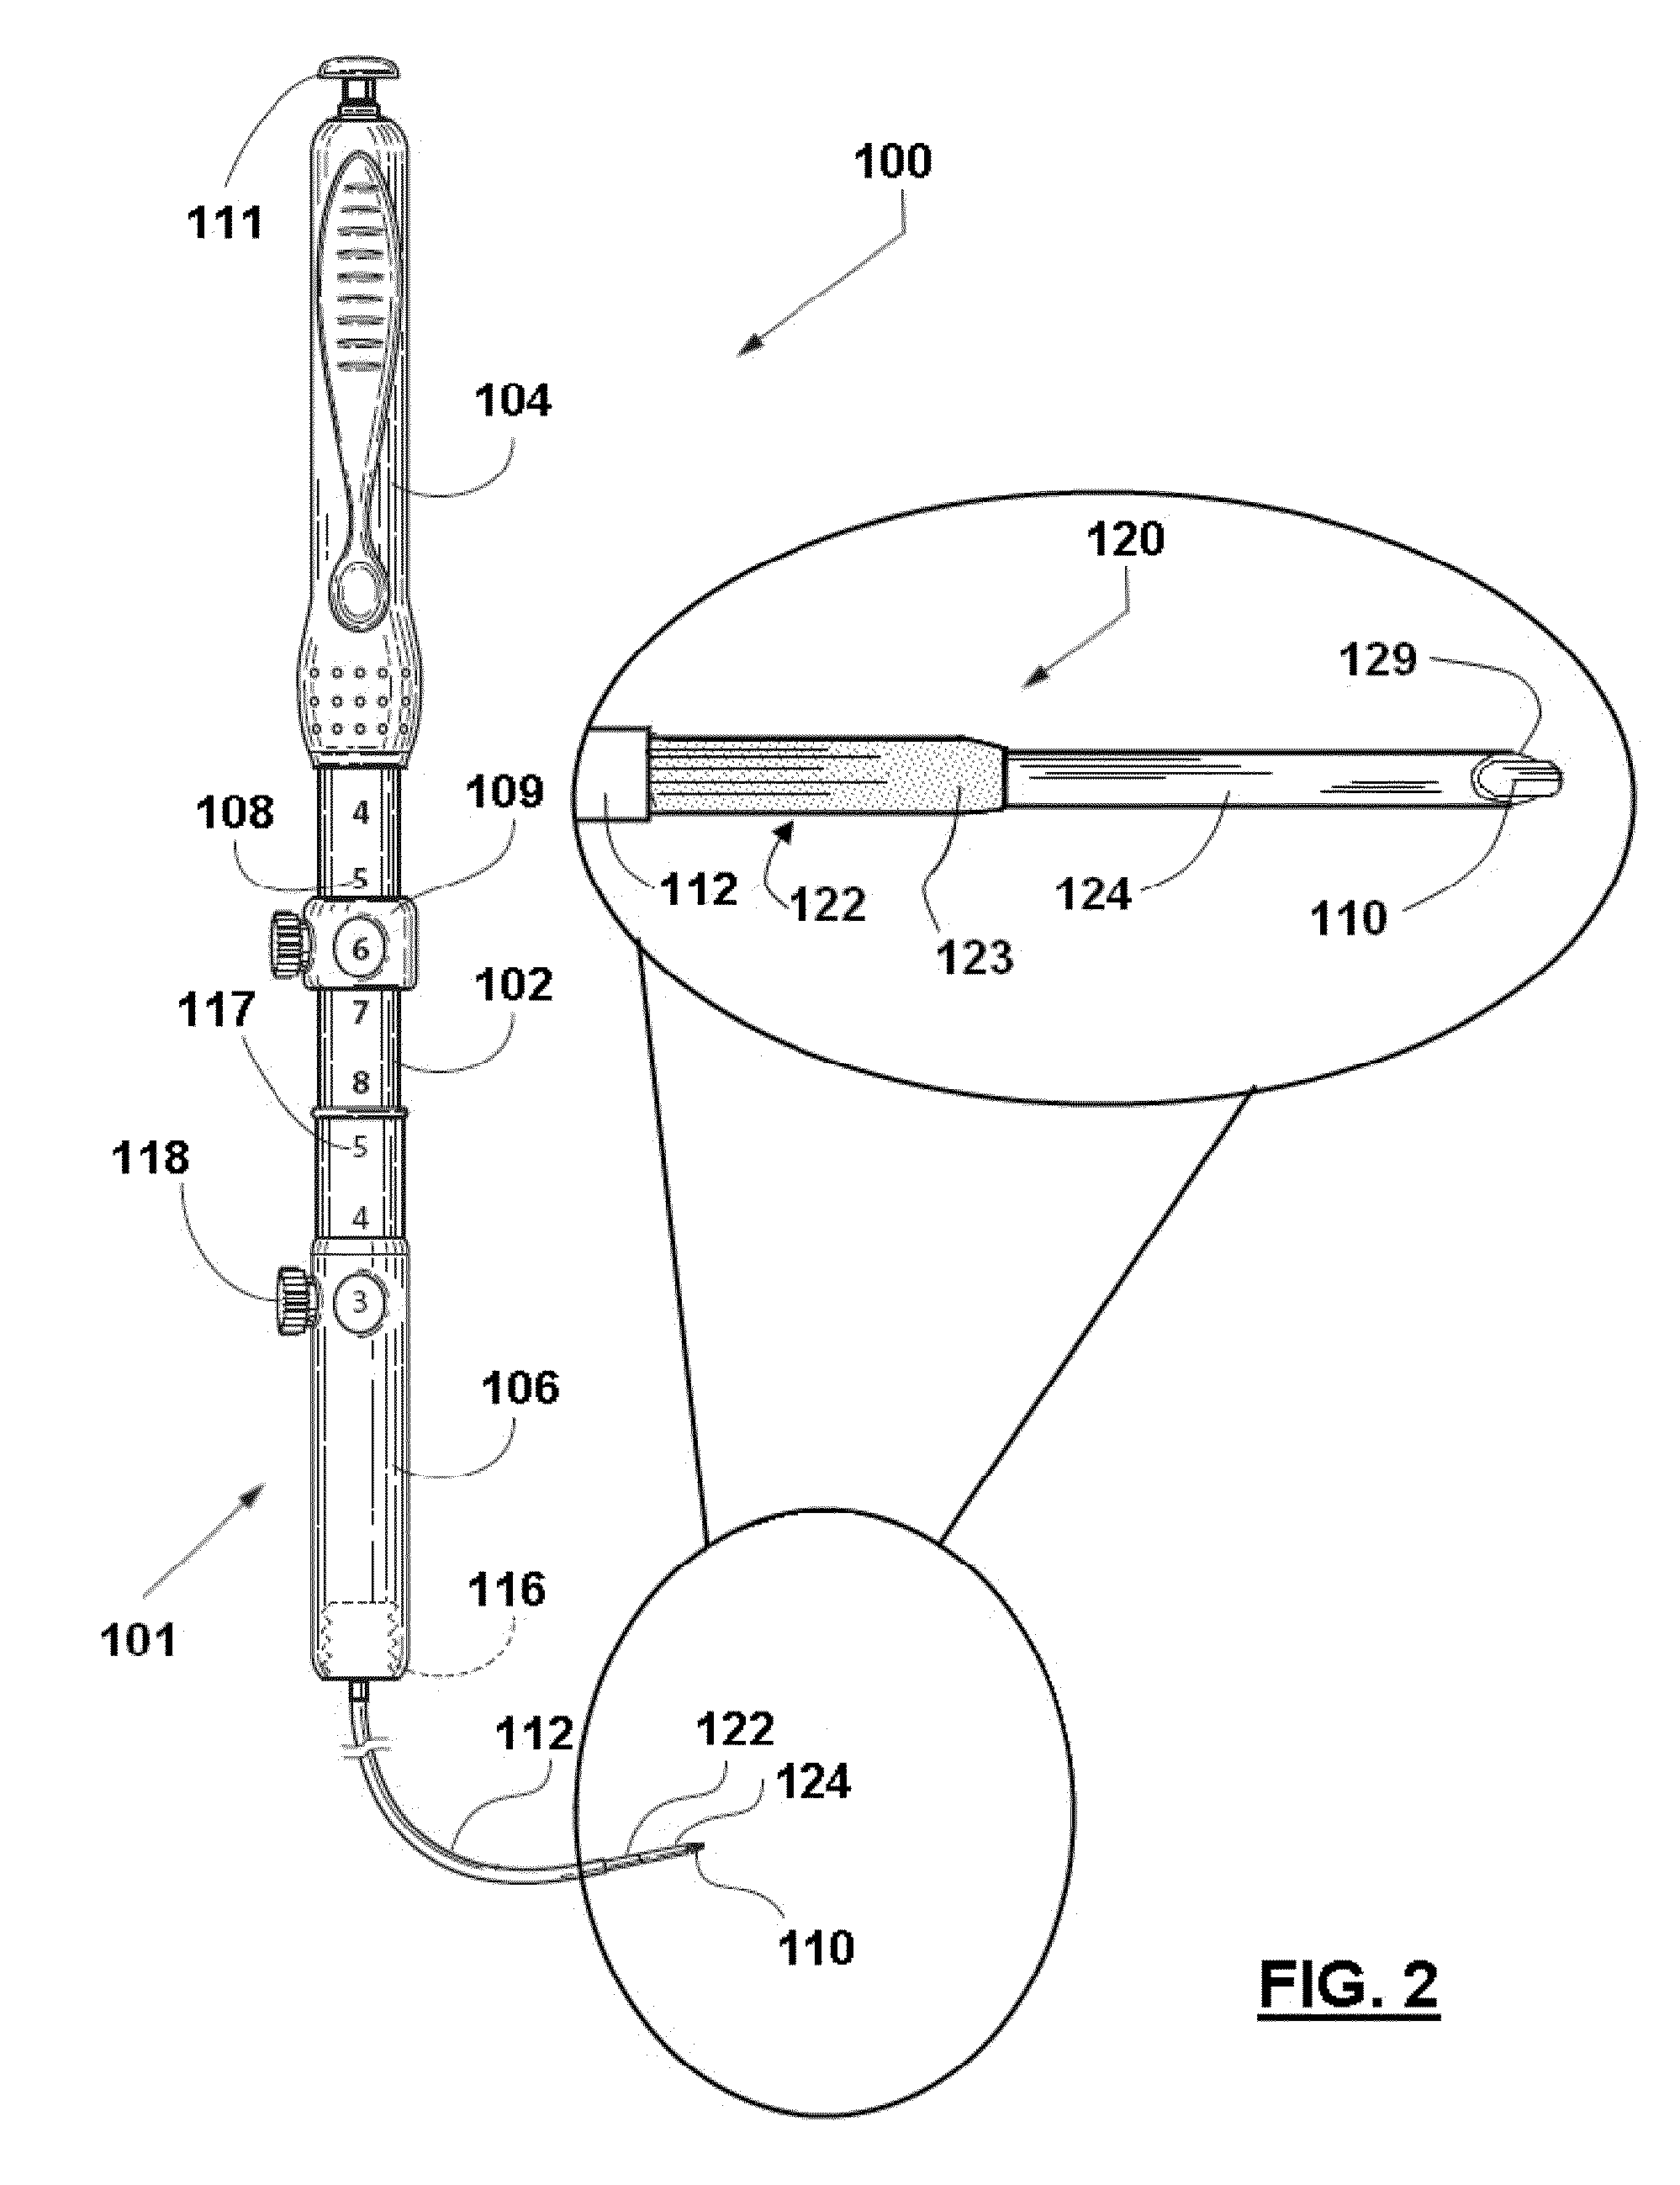 Biopsy needle with flexible length